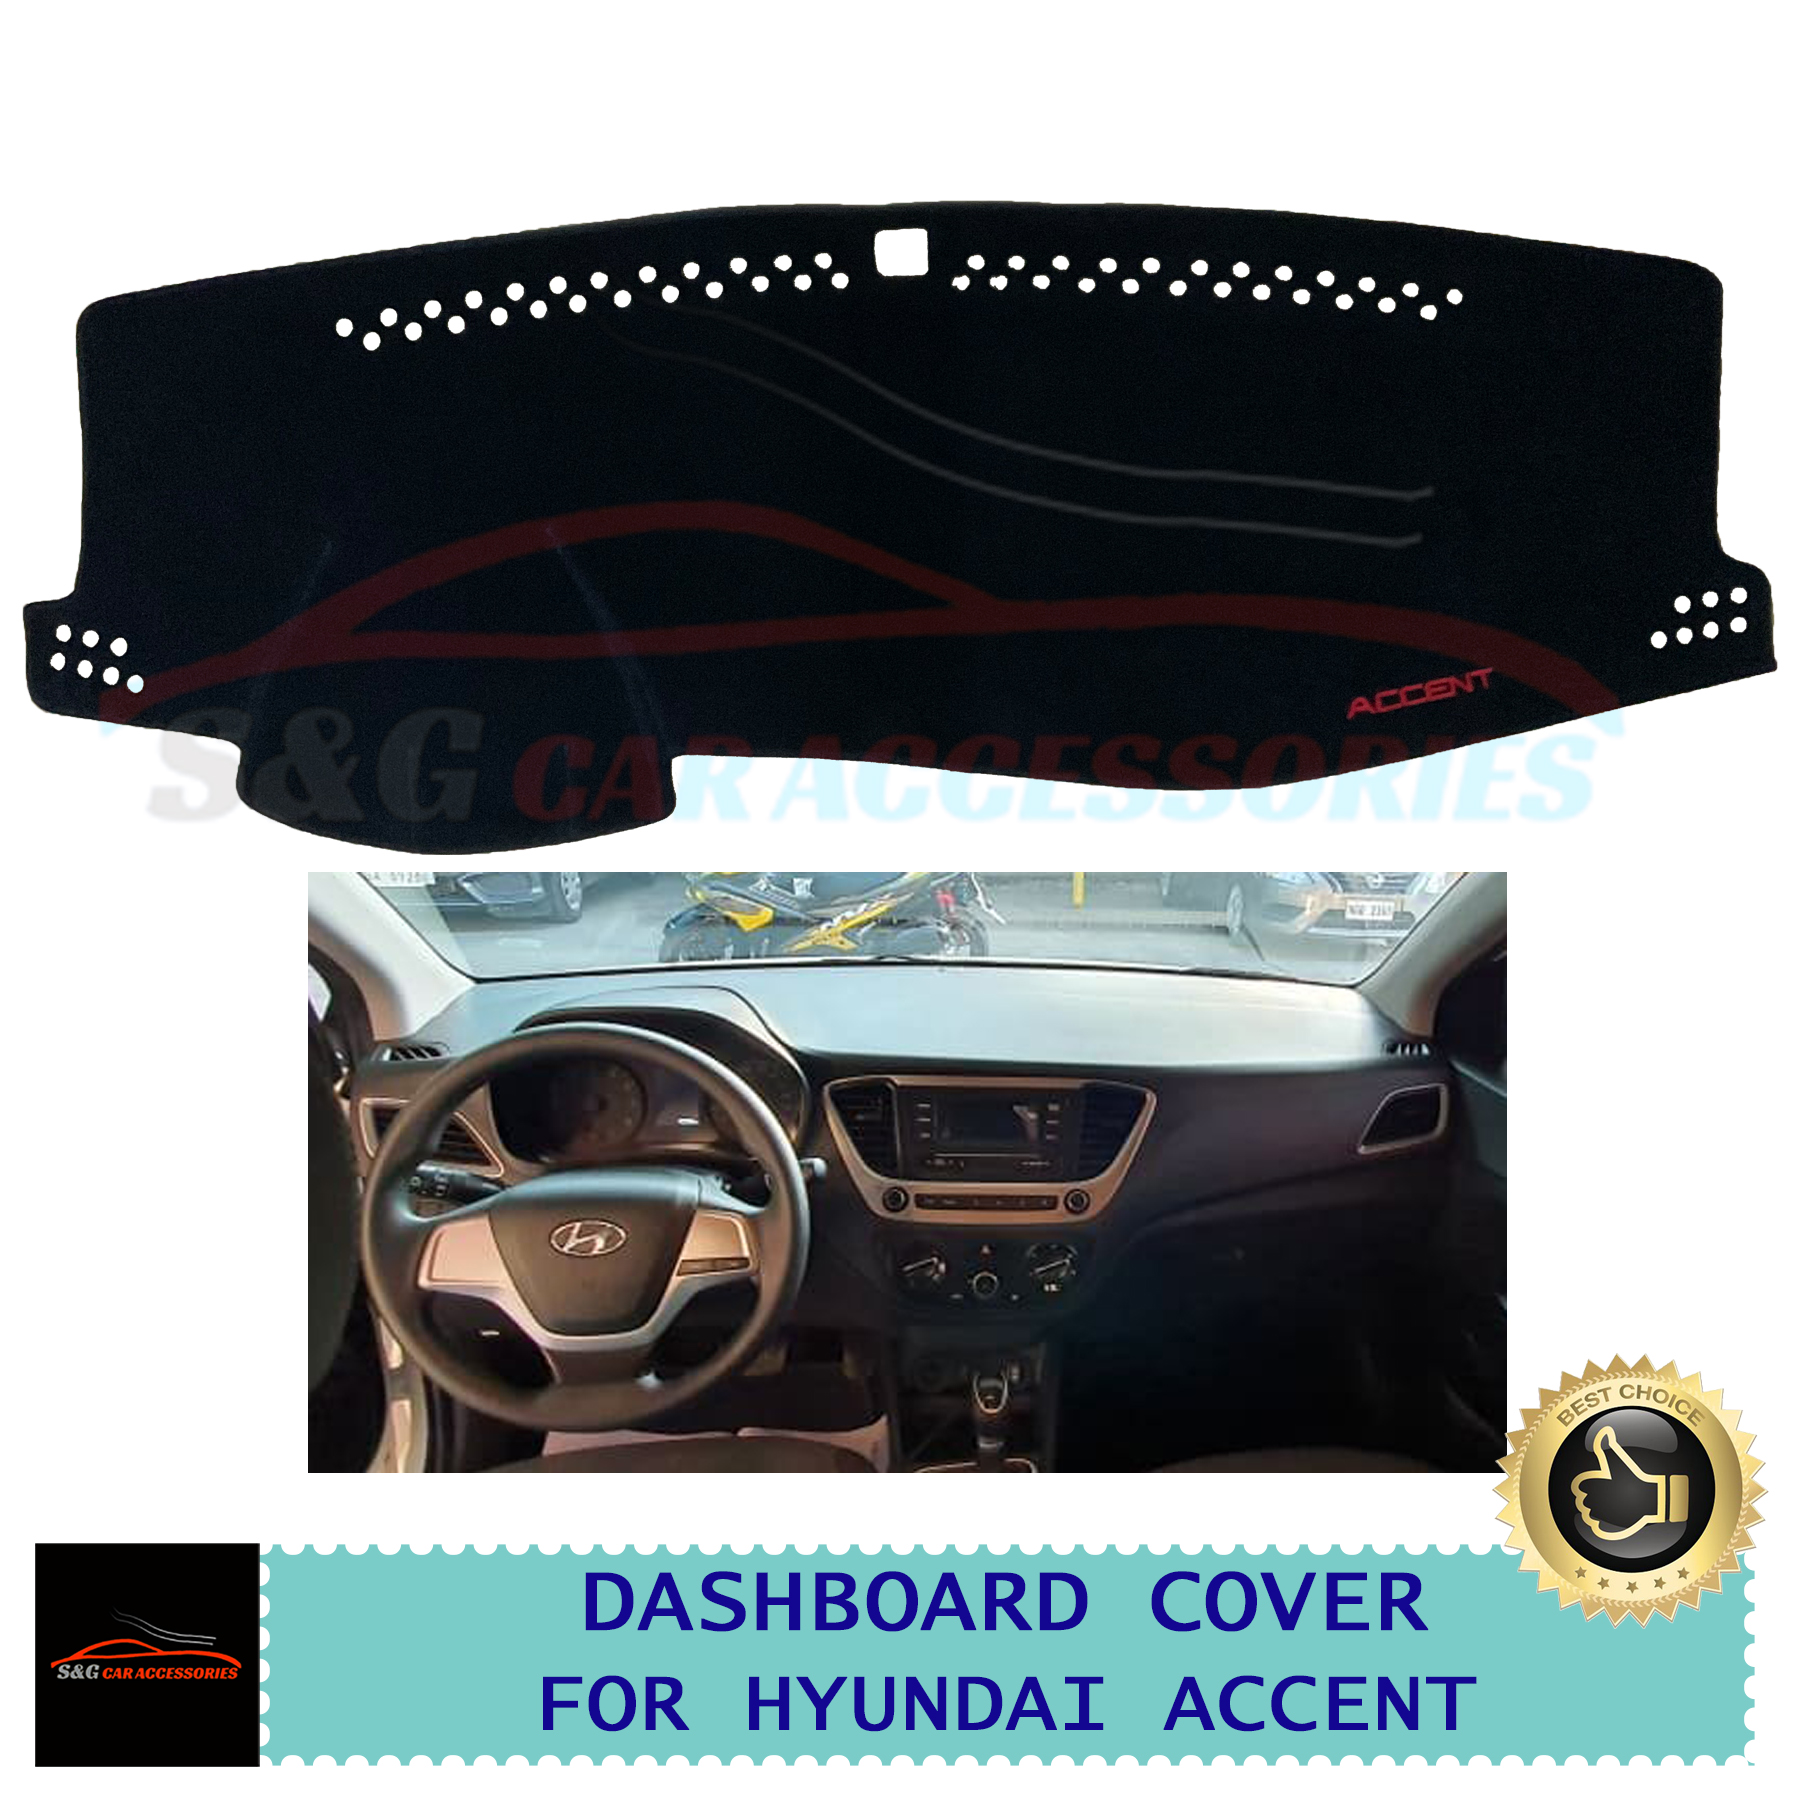 Shop Dashboard Cover For Hyundai Accent 2010 online